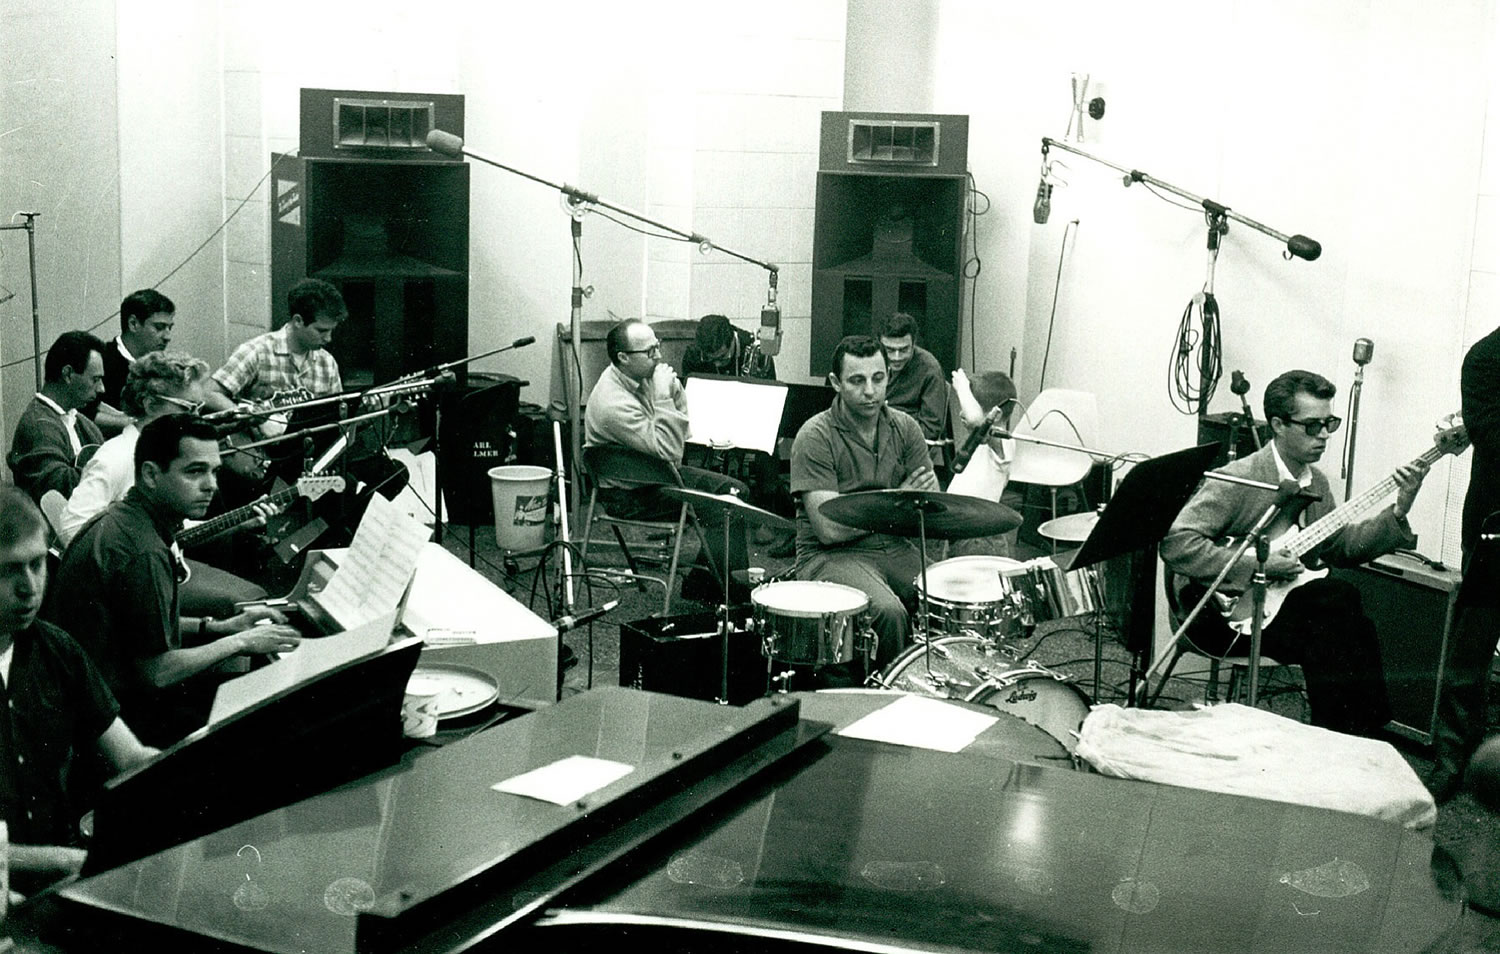 Magnolia Pictures
&quot;The Wrecking Crew&quot; is an engrossing documentary about a legendary collection of Los Angeles session musicians.